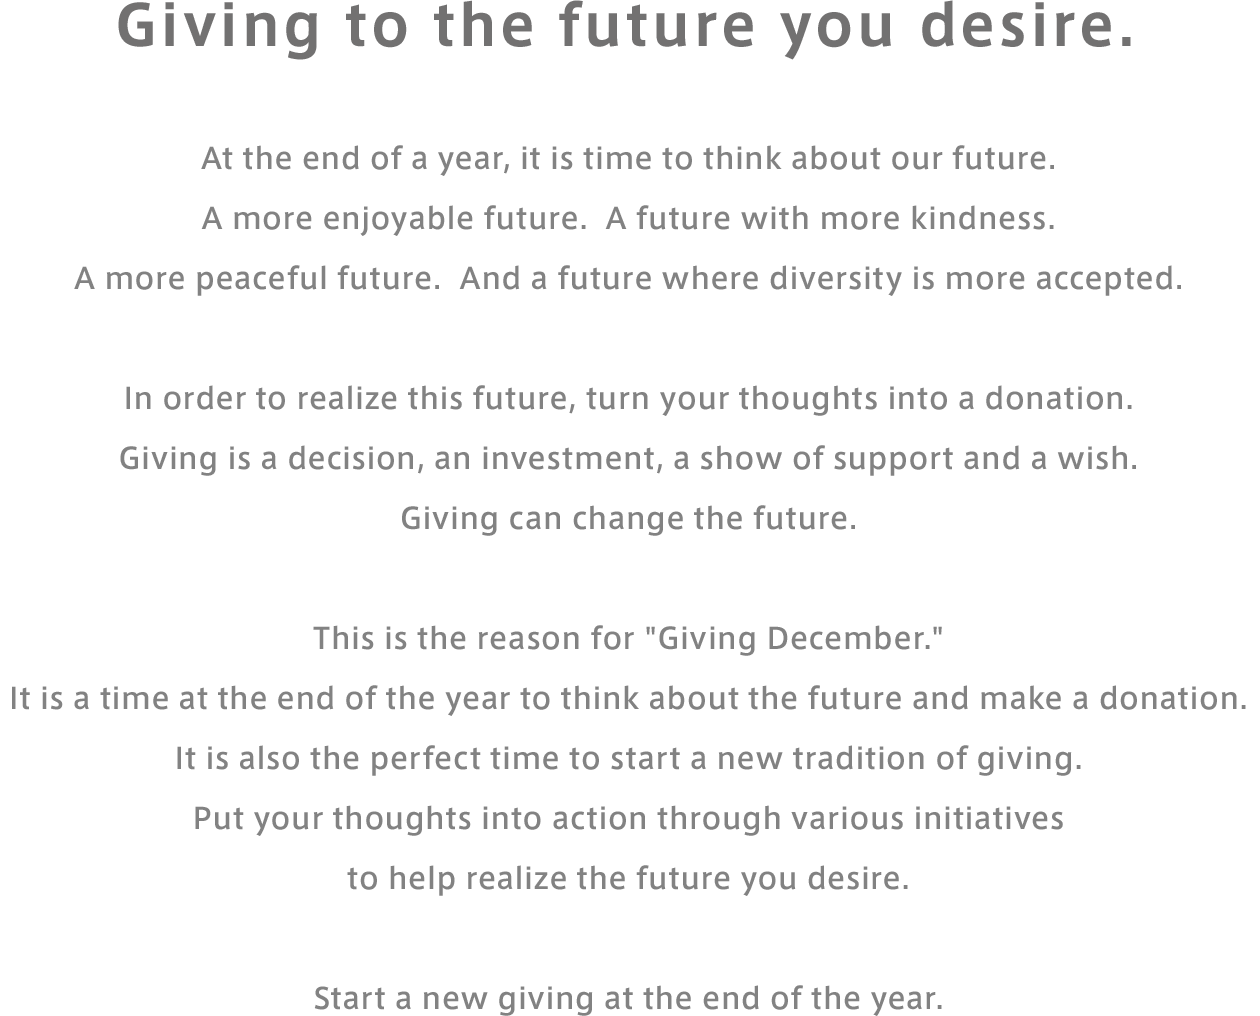 Giving to the future you desire. At the end of a year, it is time to think about our future. A more enjoyable future. A future with more kindness.A more peaceful future. And a future where diversity is more accepted. In order to realize this future, turn your thoughts into a donation. Giving is a decision, an investment, a show of support and a wish. Giving can change the future. This is the reason for "Giving December." It is a time at the end of the year to think about the future and make a donation. It is also the perfect time to start a new tradition of giving. Put your thoughts into action through various initiatives to help realize the future you desire. Start a new giving at the end of the year.